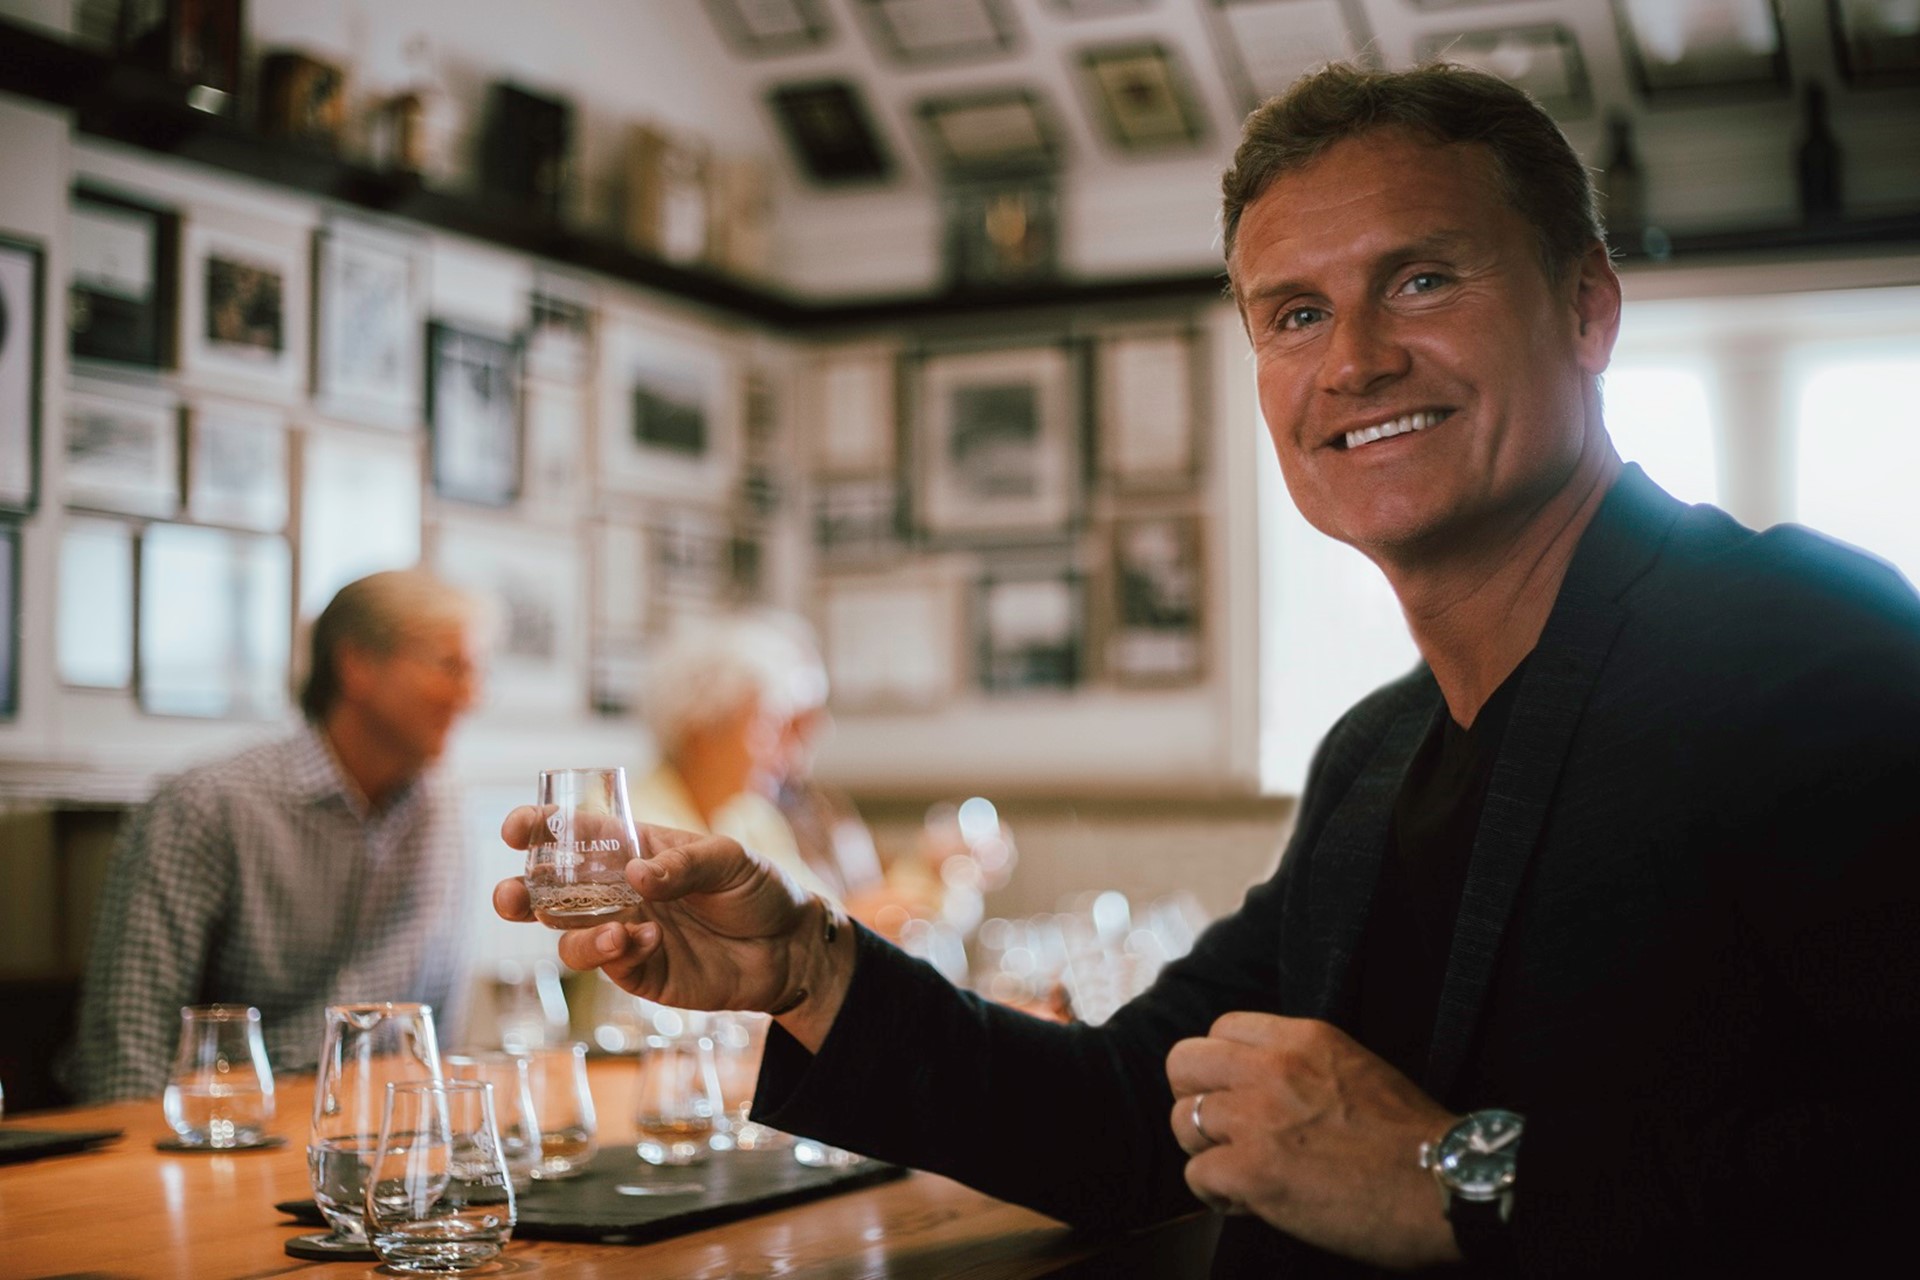 F1 racing legend, David Coulthard, partnered with Highland Park to launch the Saltire Edition whiskies